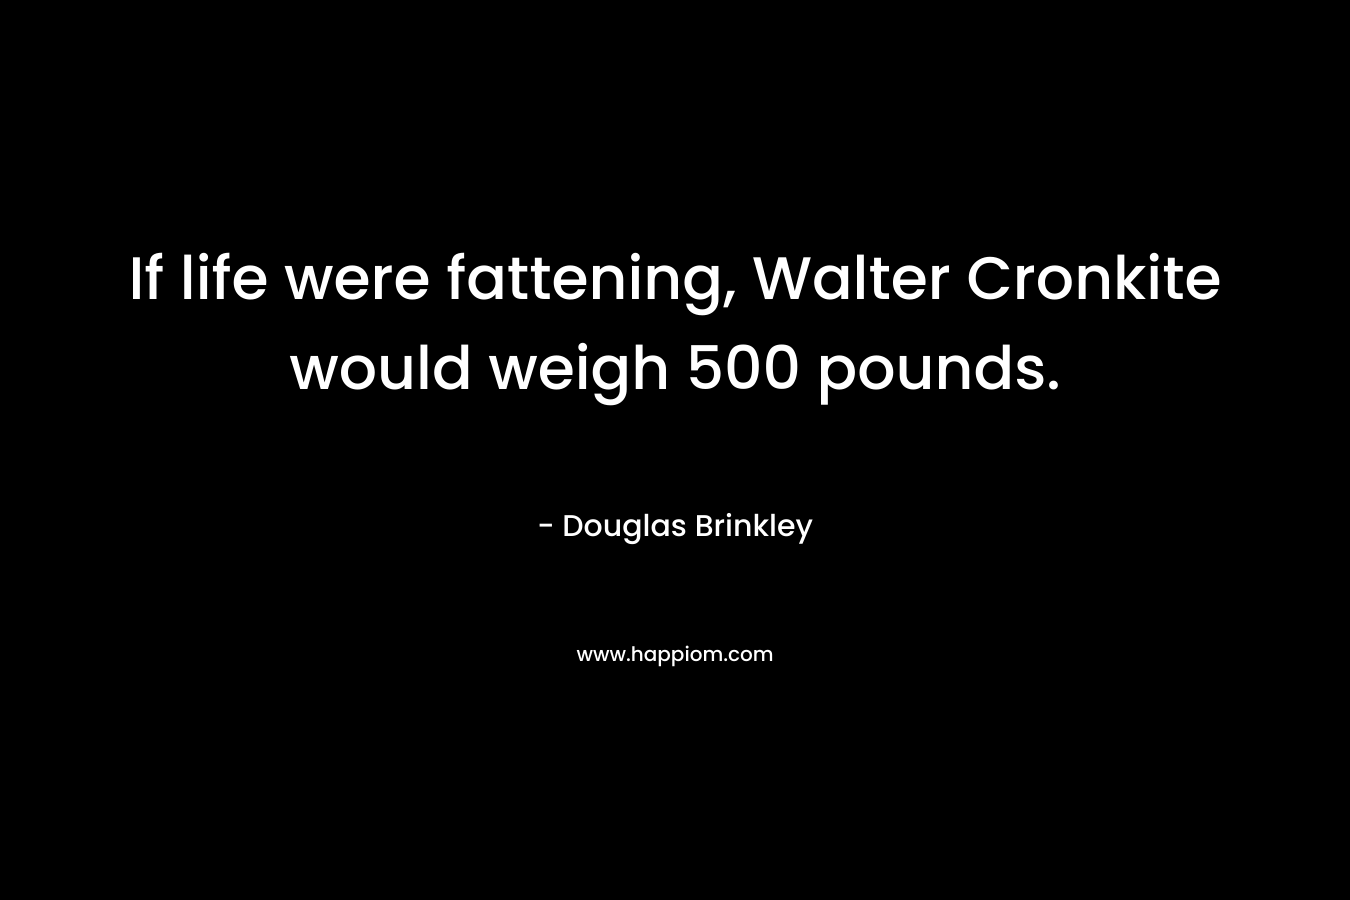 If life were fattening, Walter Cronkite would weigh 500 pounds. – Douglas Brinkley